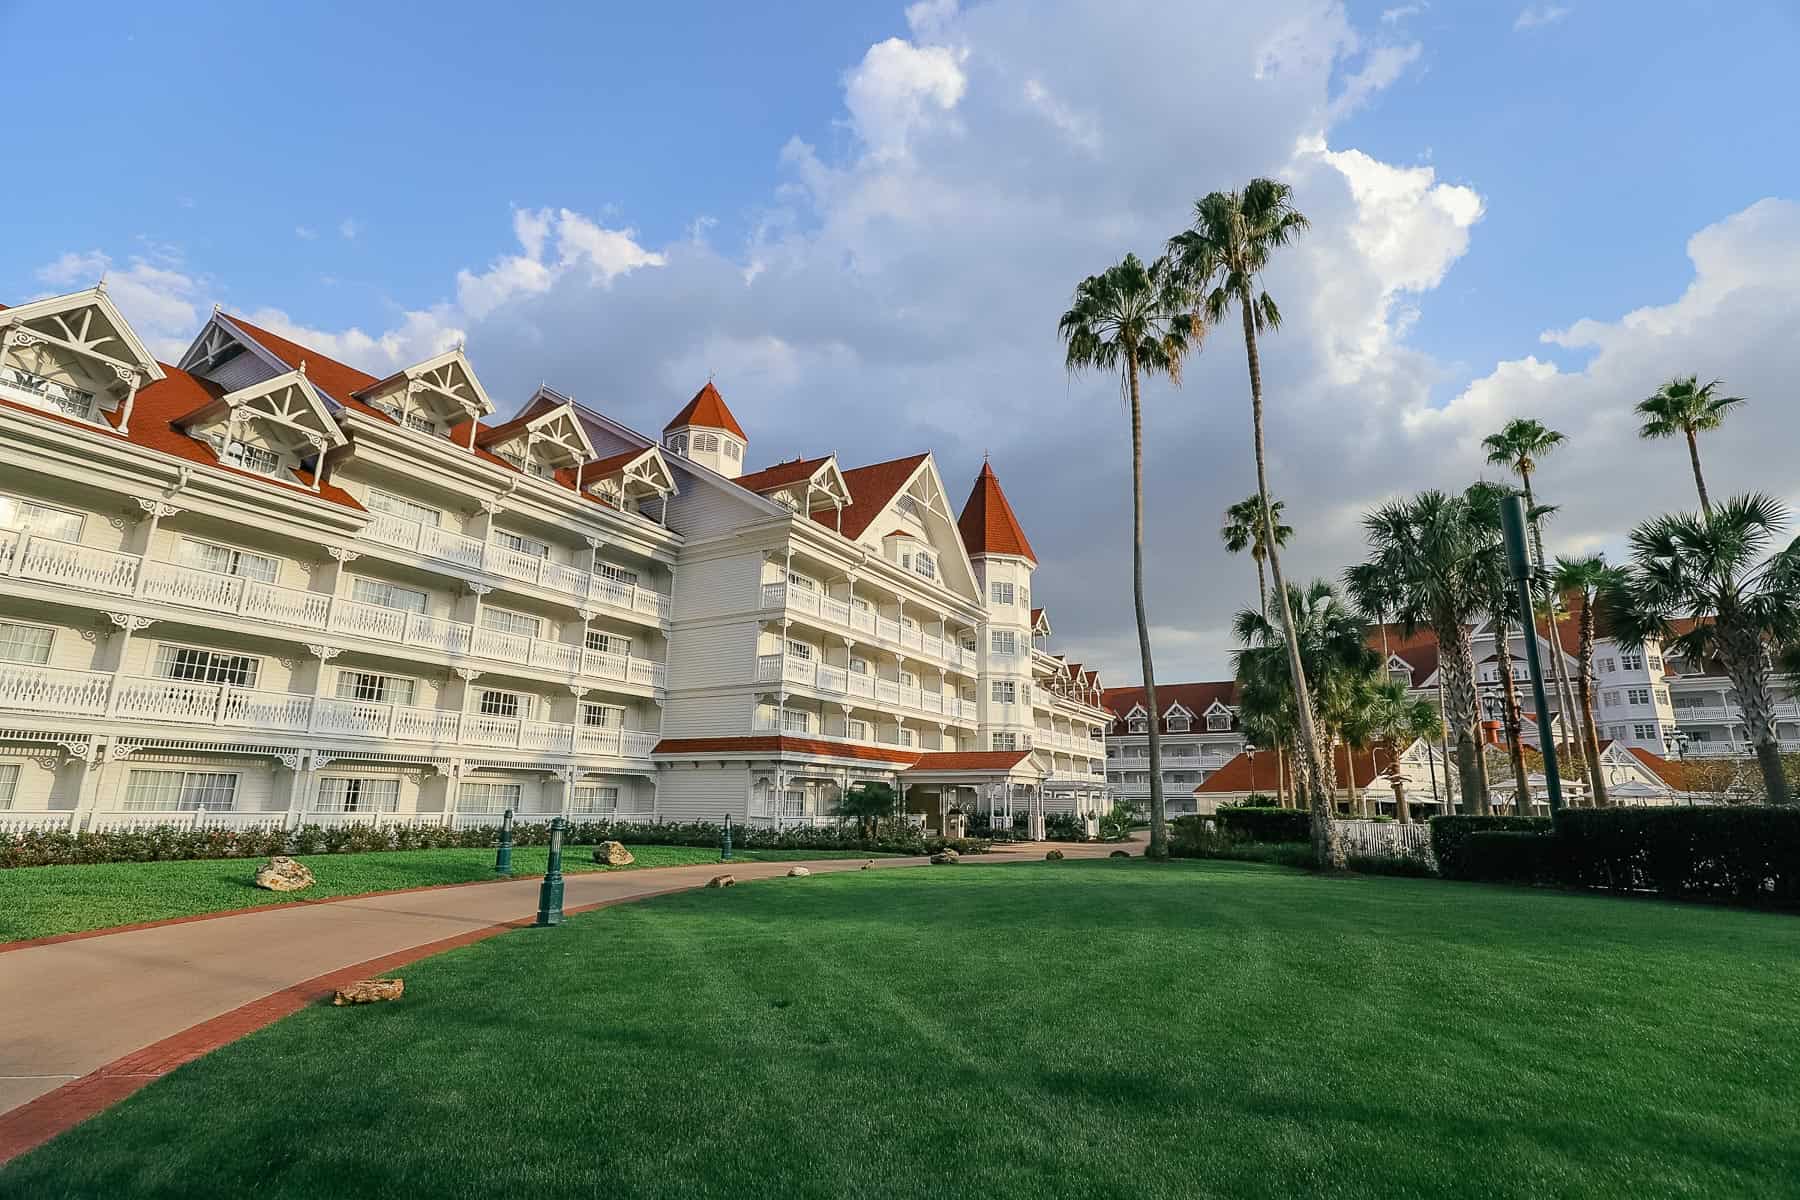 Grand Floridian, Disney's Most Expensive Resort